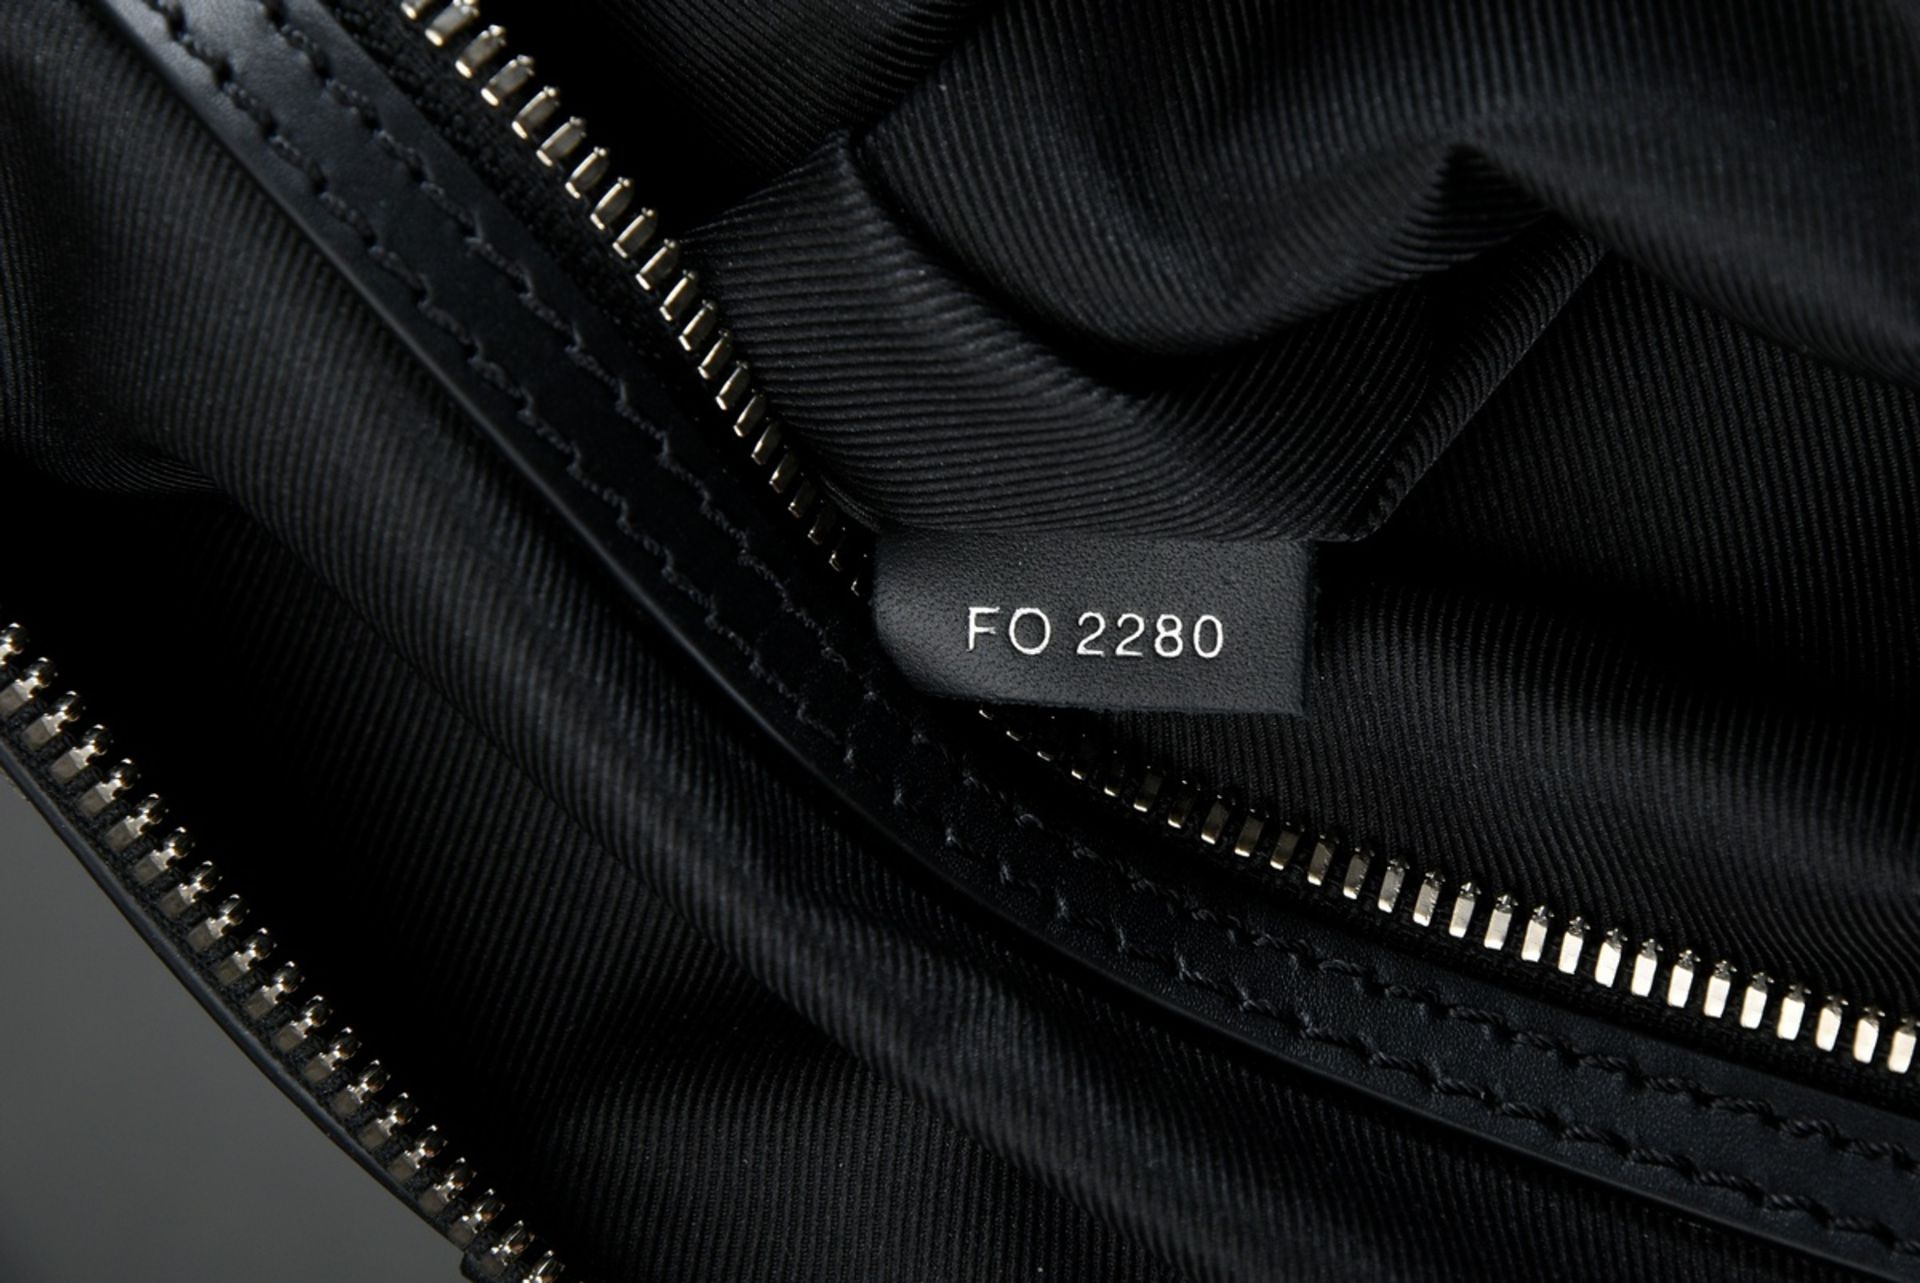 Louis Vuitton "Keepall 50" in Epi black, Damier graphite and raised Brand lettering on blue and whi - Image 9 of 9